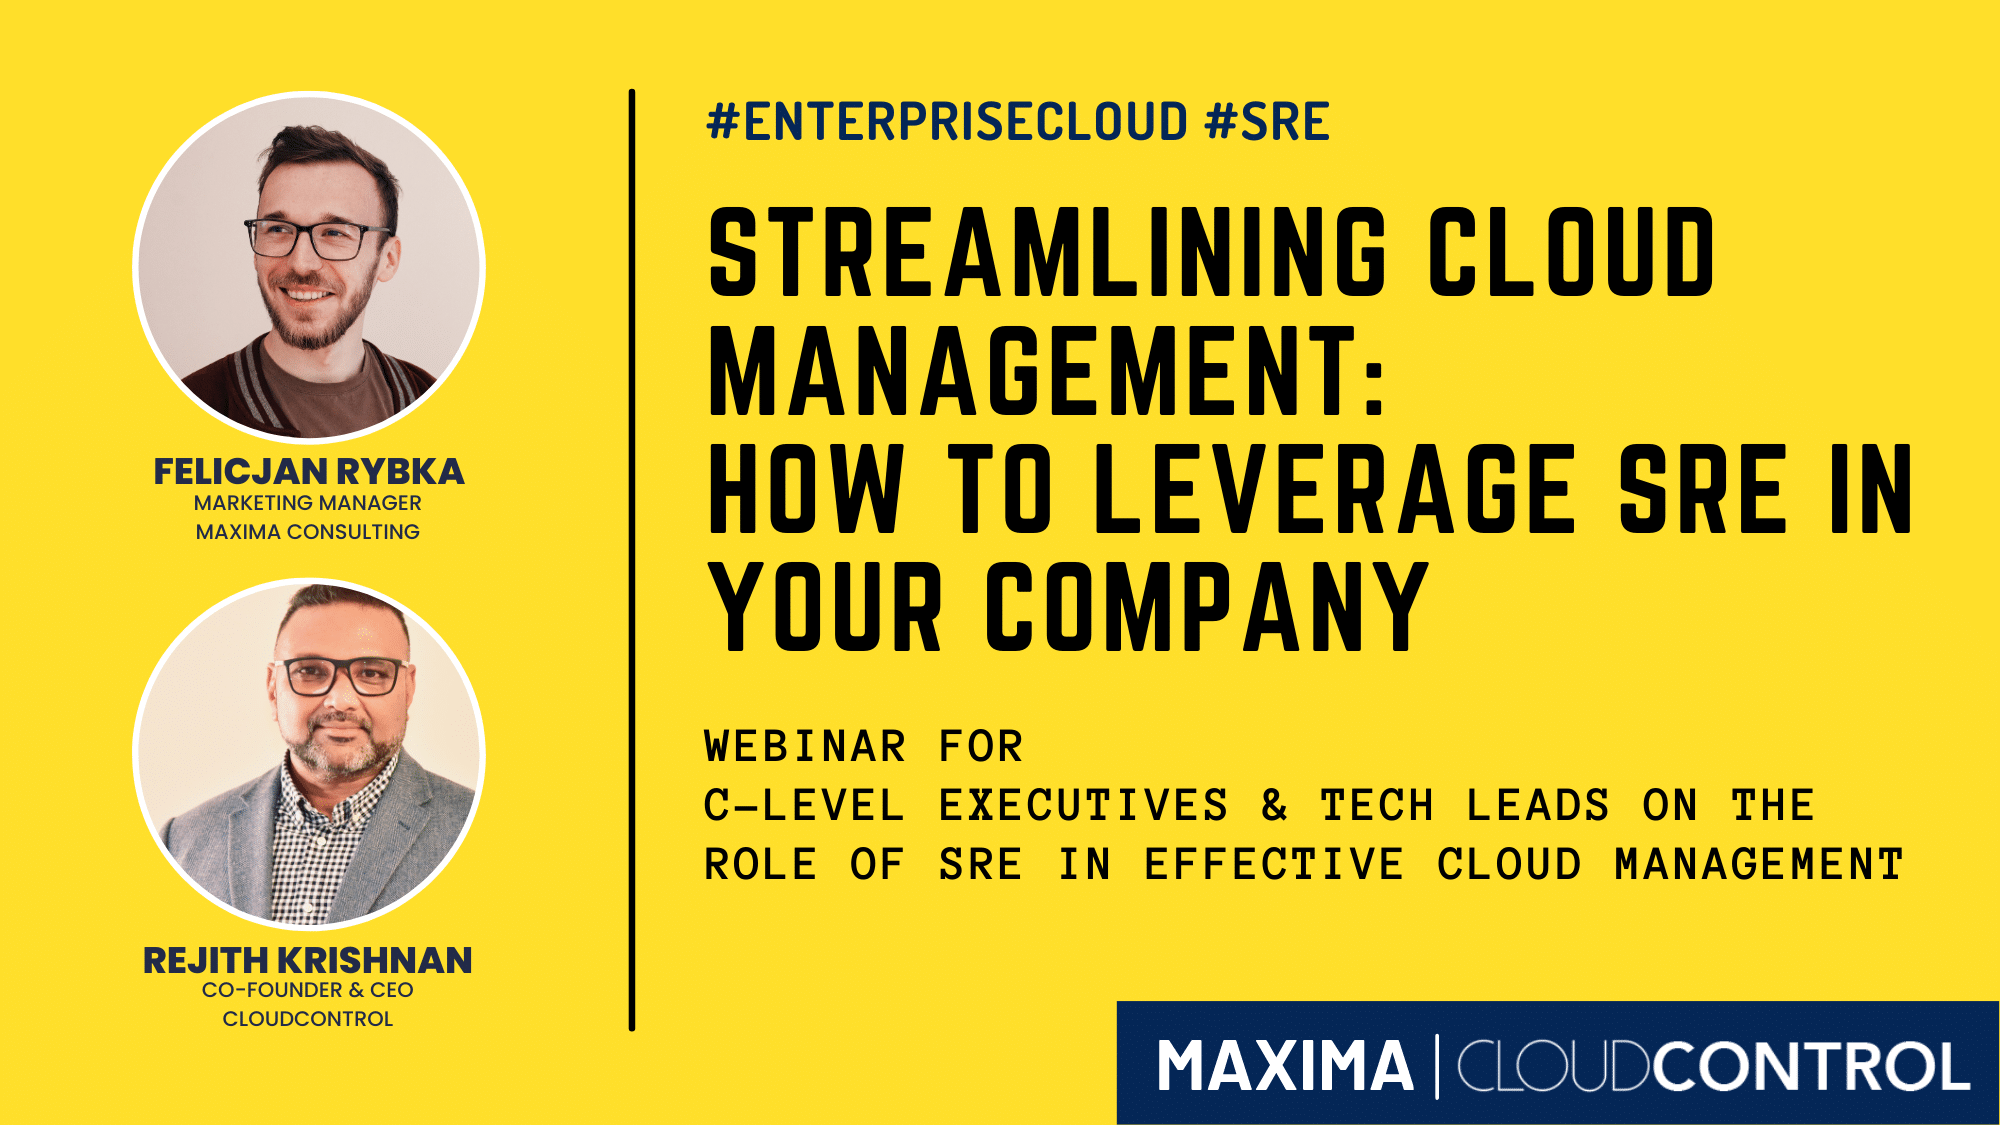 Streamlining Cloud Management: how to leverage SRE in your company